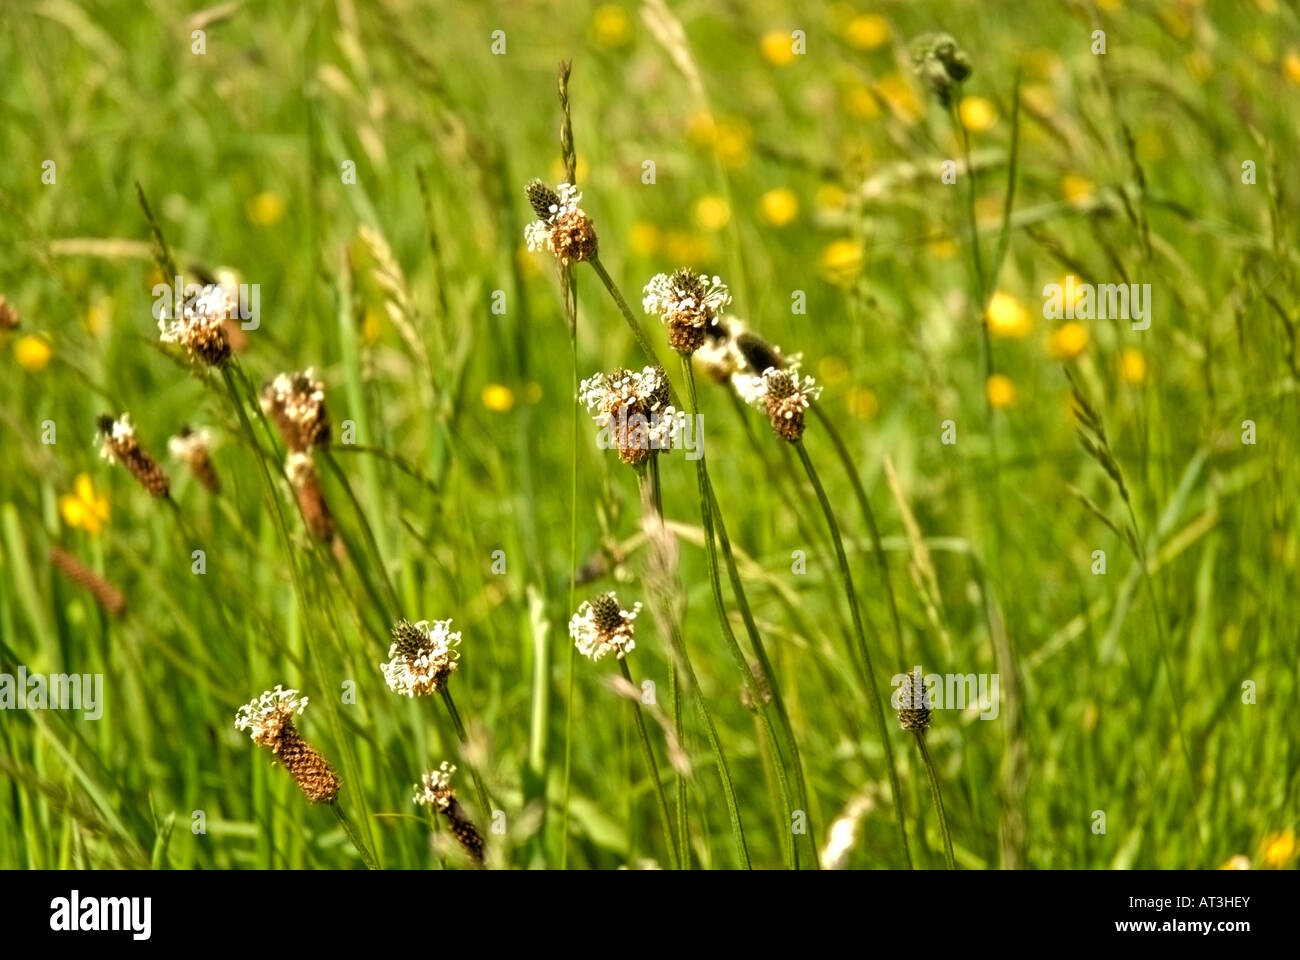 Flowering English Plantain, Plantago lanceolata. It is a common weed of cultivated land. Stock Photo